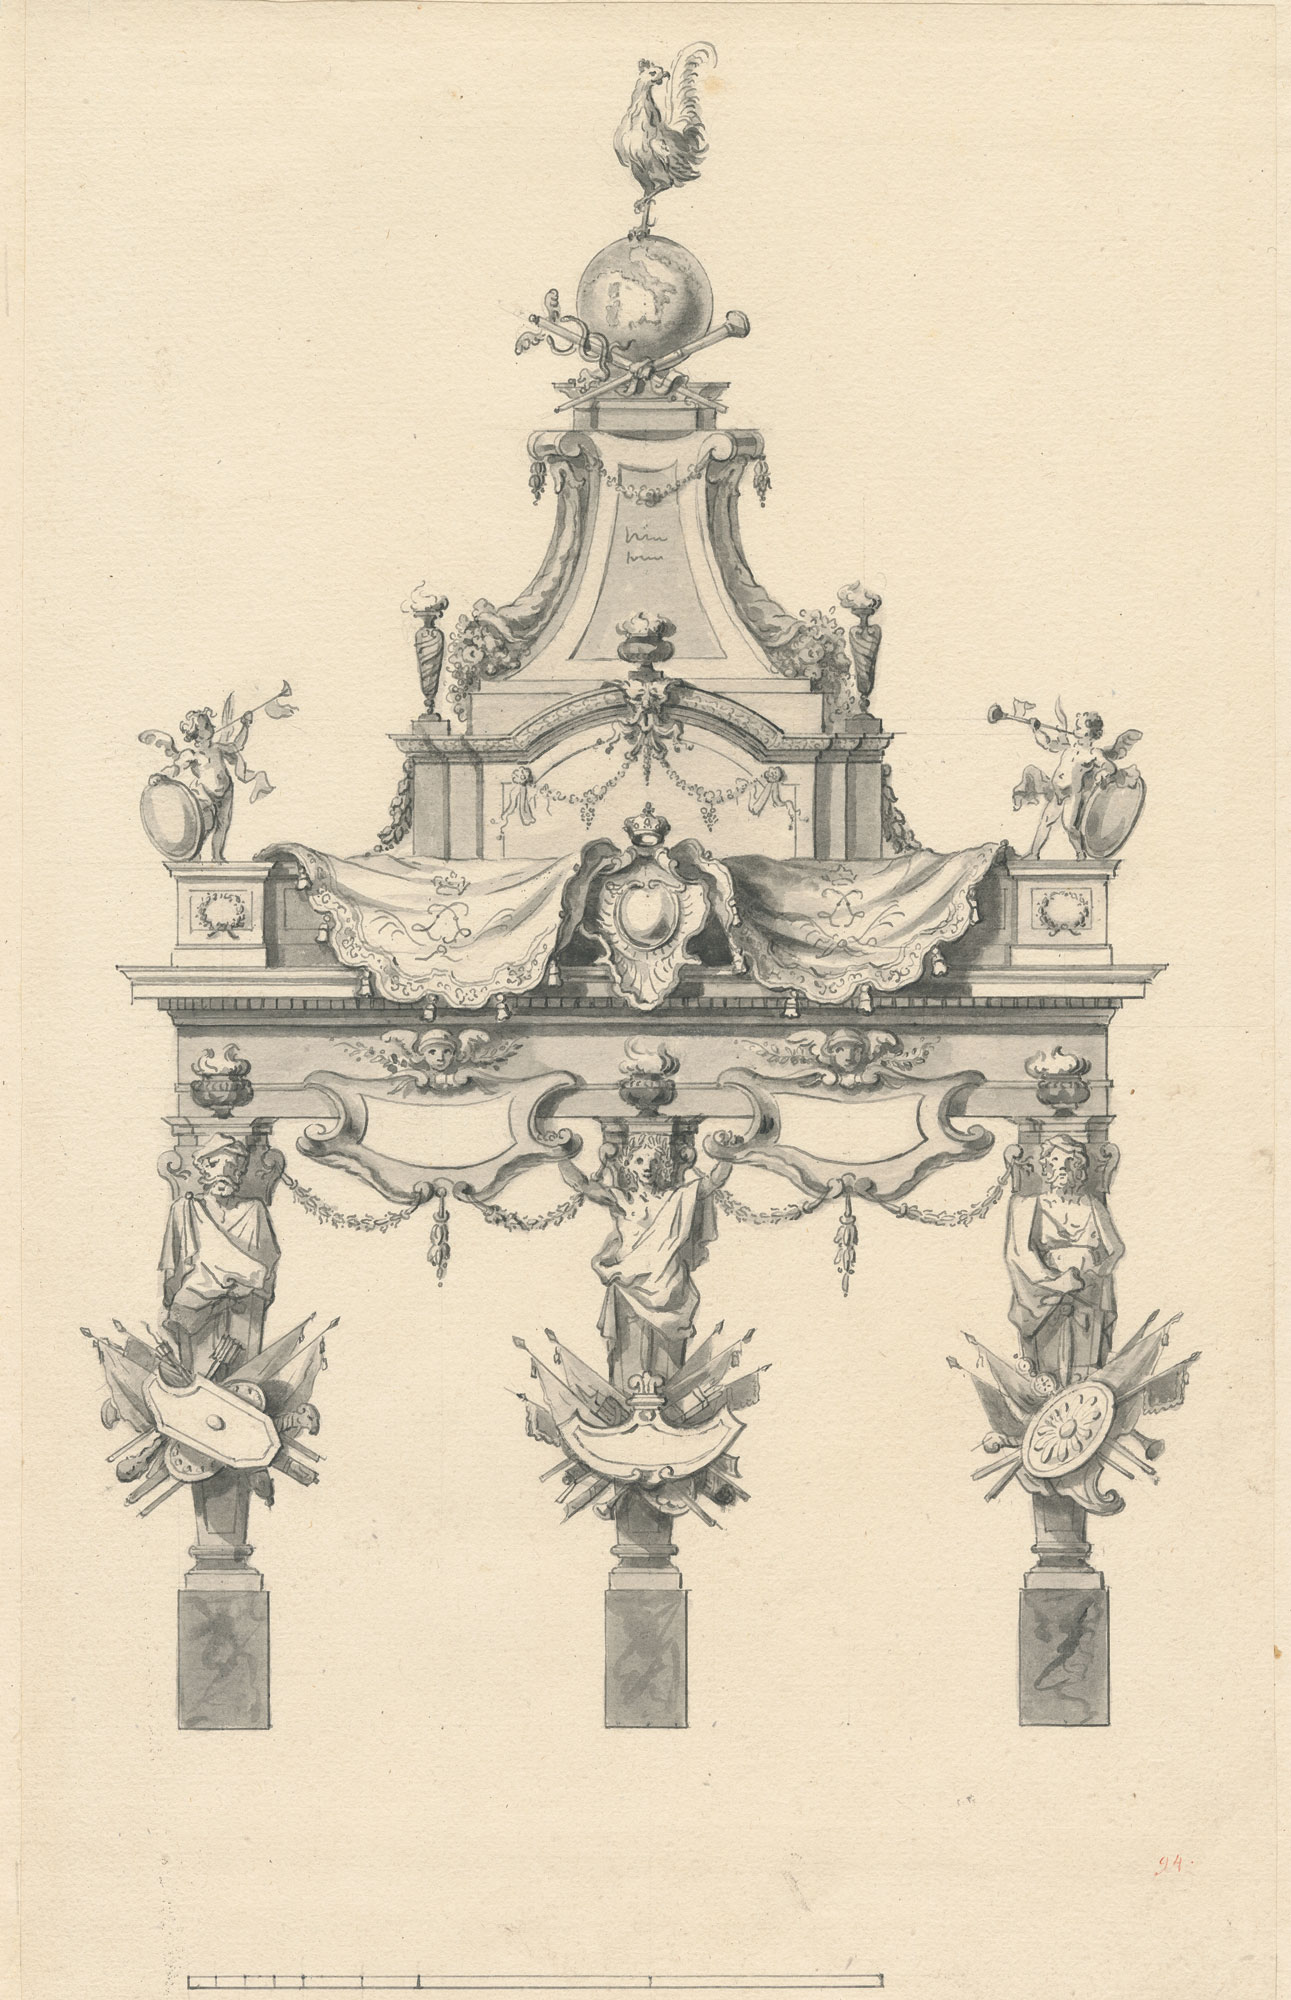 Ink and wash sketch of an architectural decoration